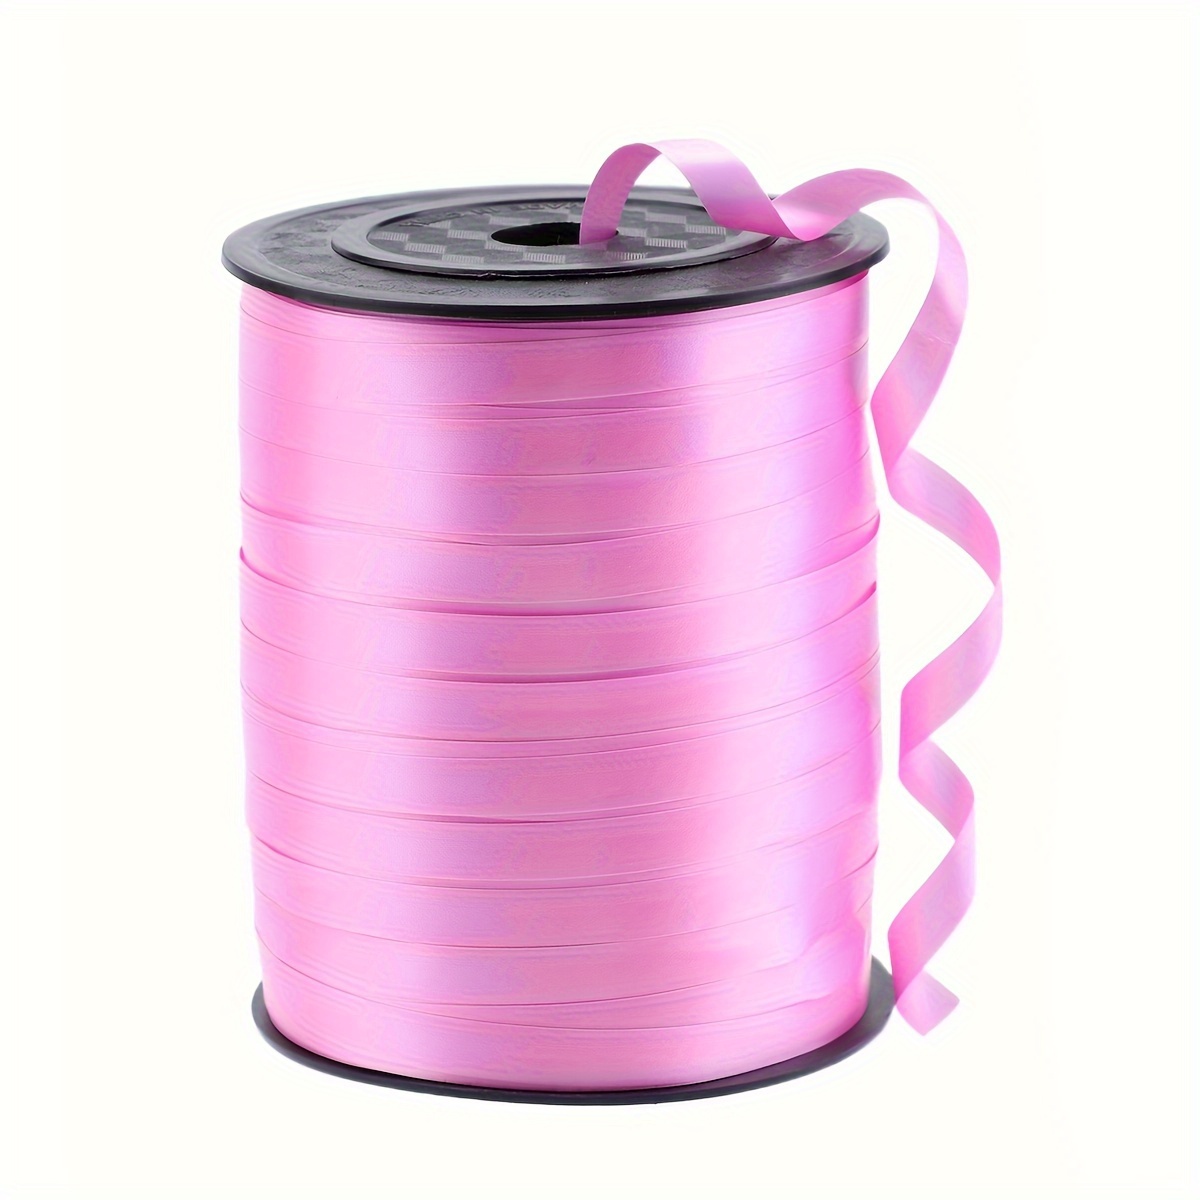 Premium Pink Curling Ribbon, 1/5 Wide x 500 Yards Christmas Curling Ribbons for Gift Wrapping, Party Decoration, Balloon String, Ribbons for